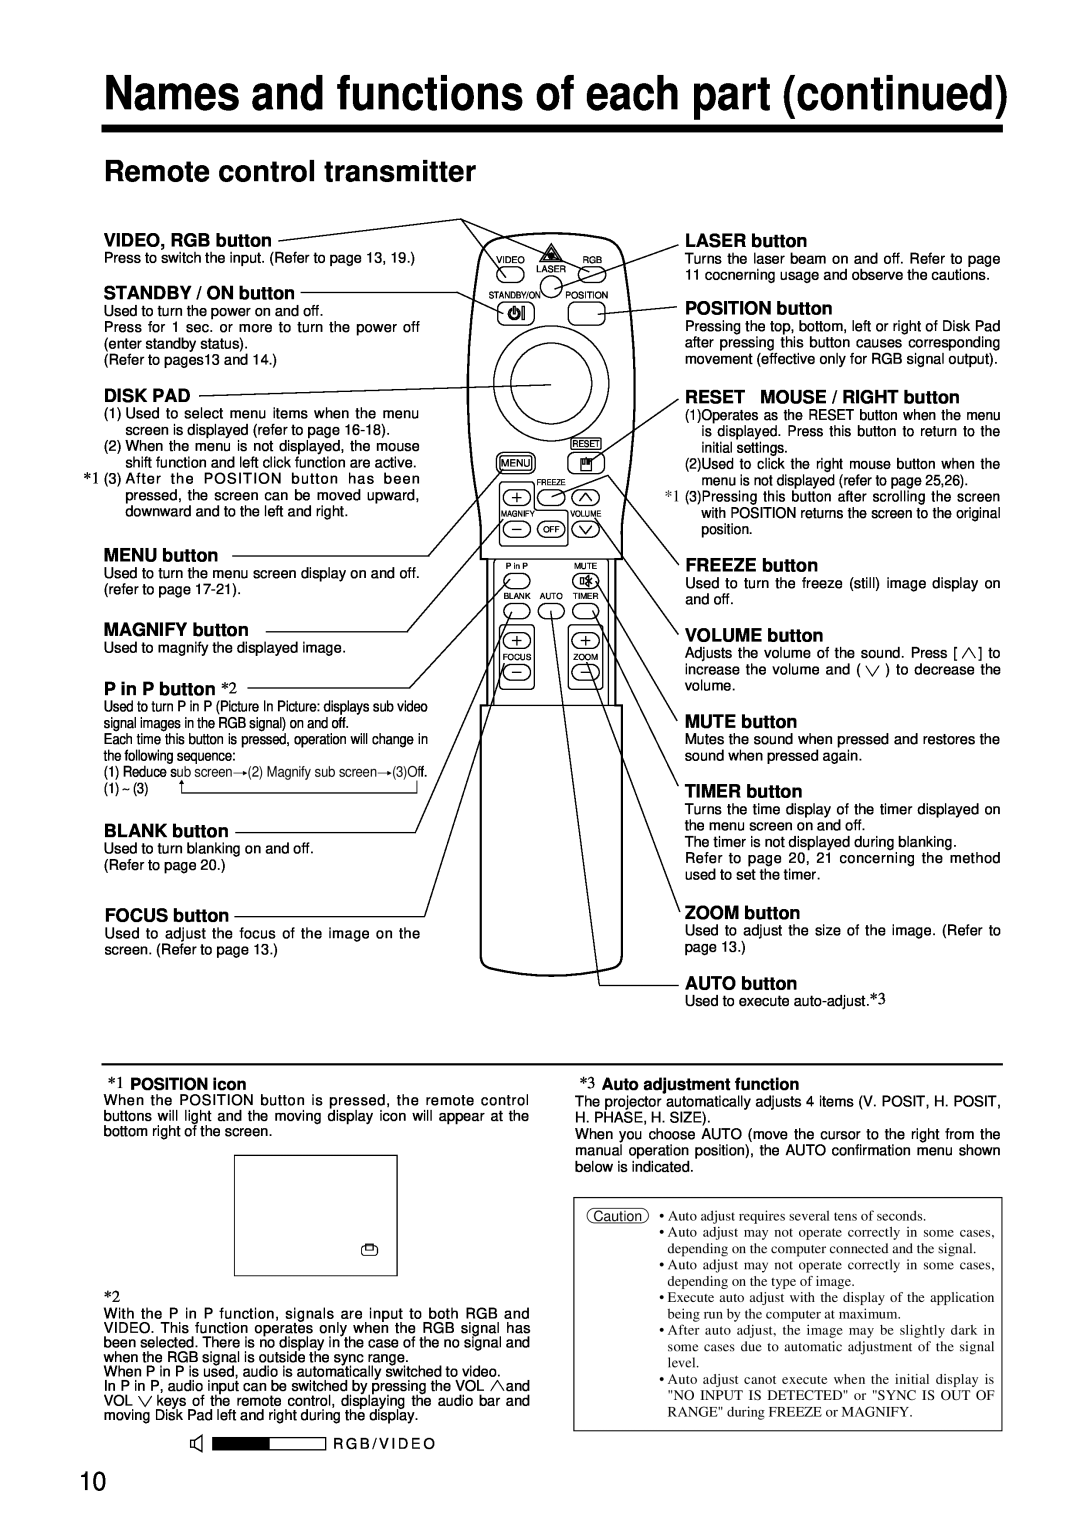 Hitachi CP-S860W user manual Remote control transmitter, Names and functions of each part continued 